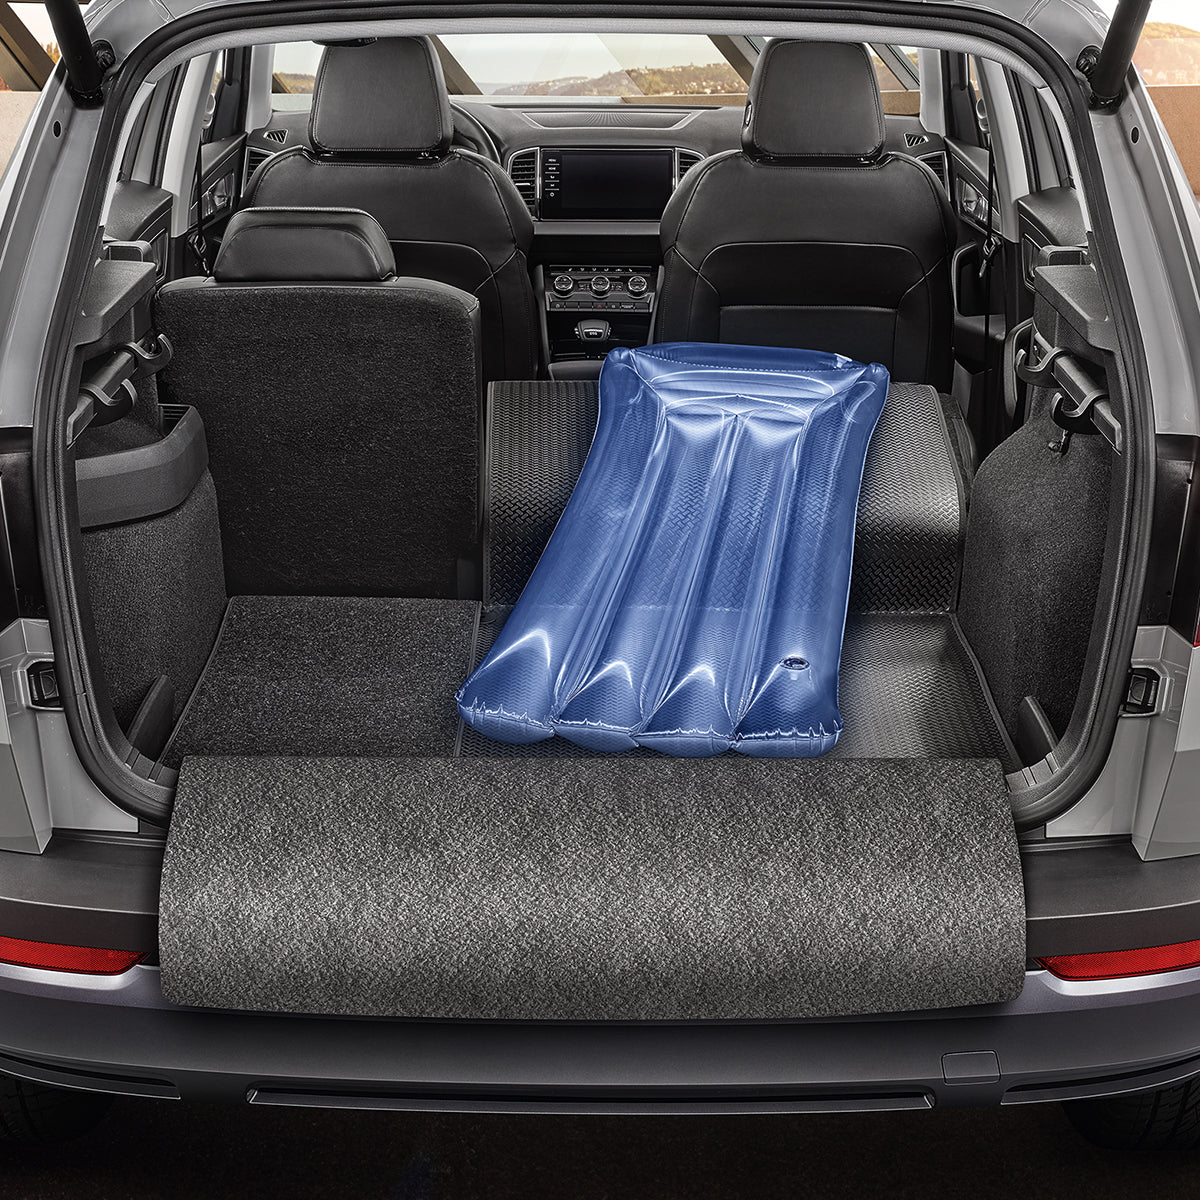 Boot liner Foldable with bumper cover, SKODA Boot Mats